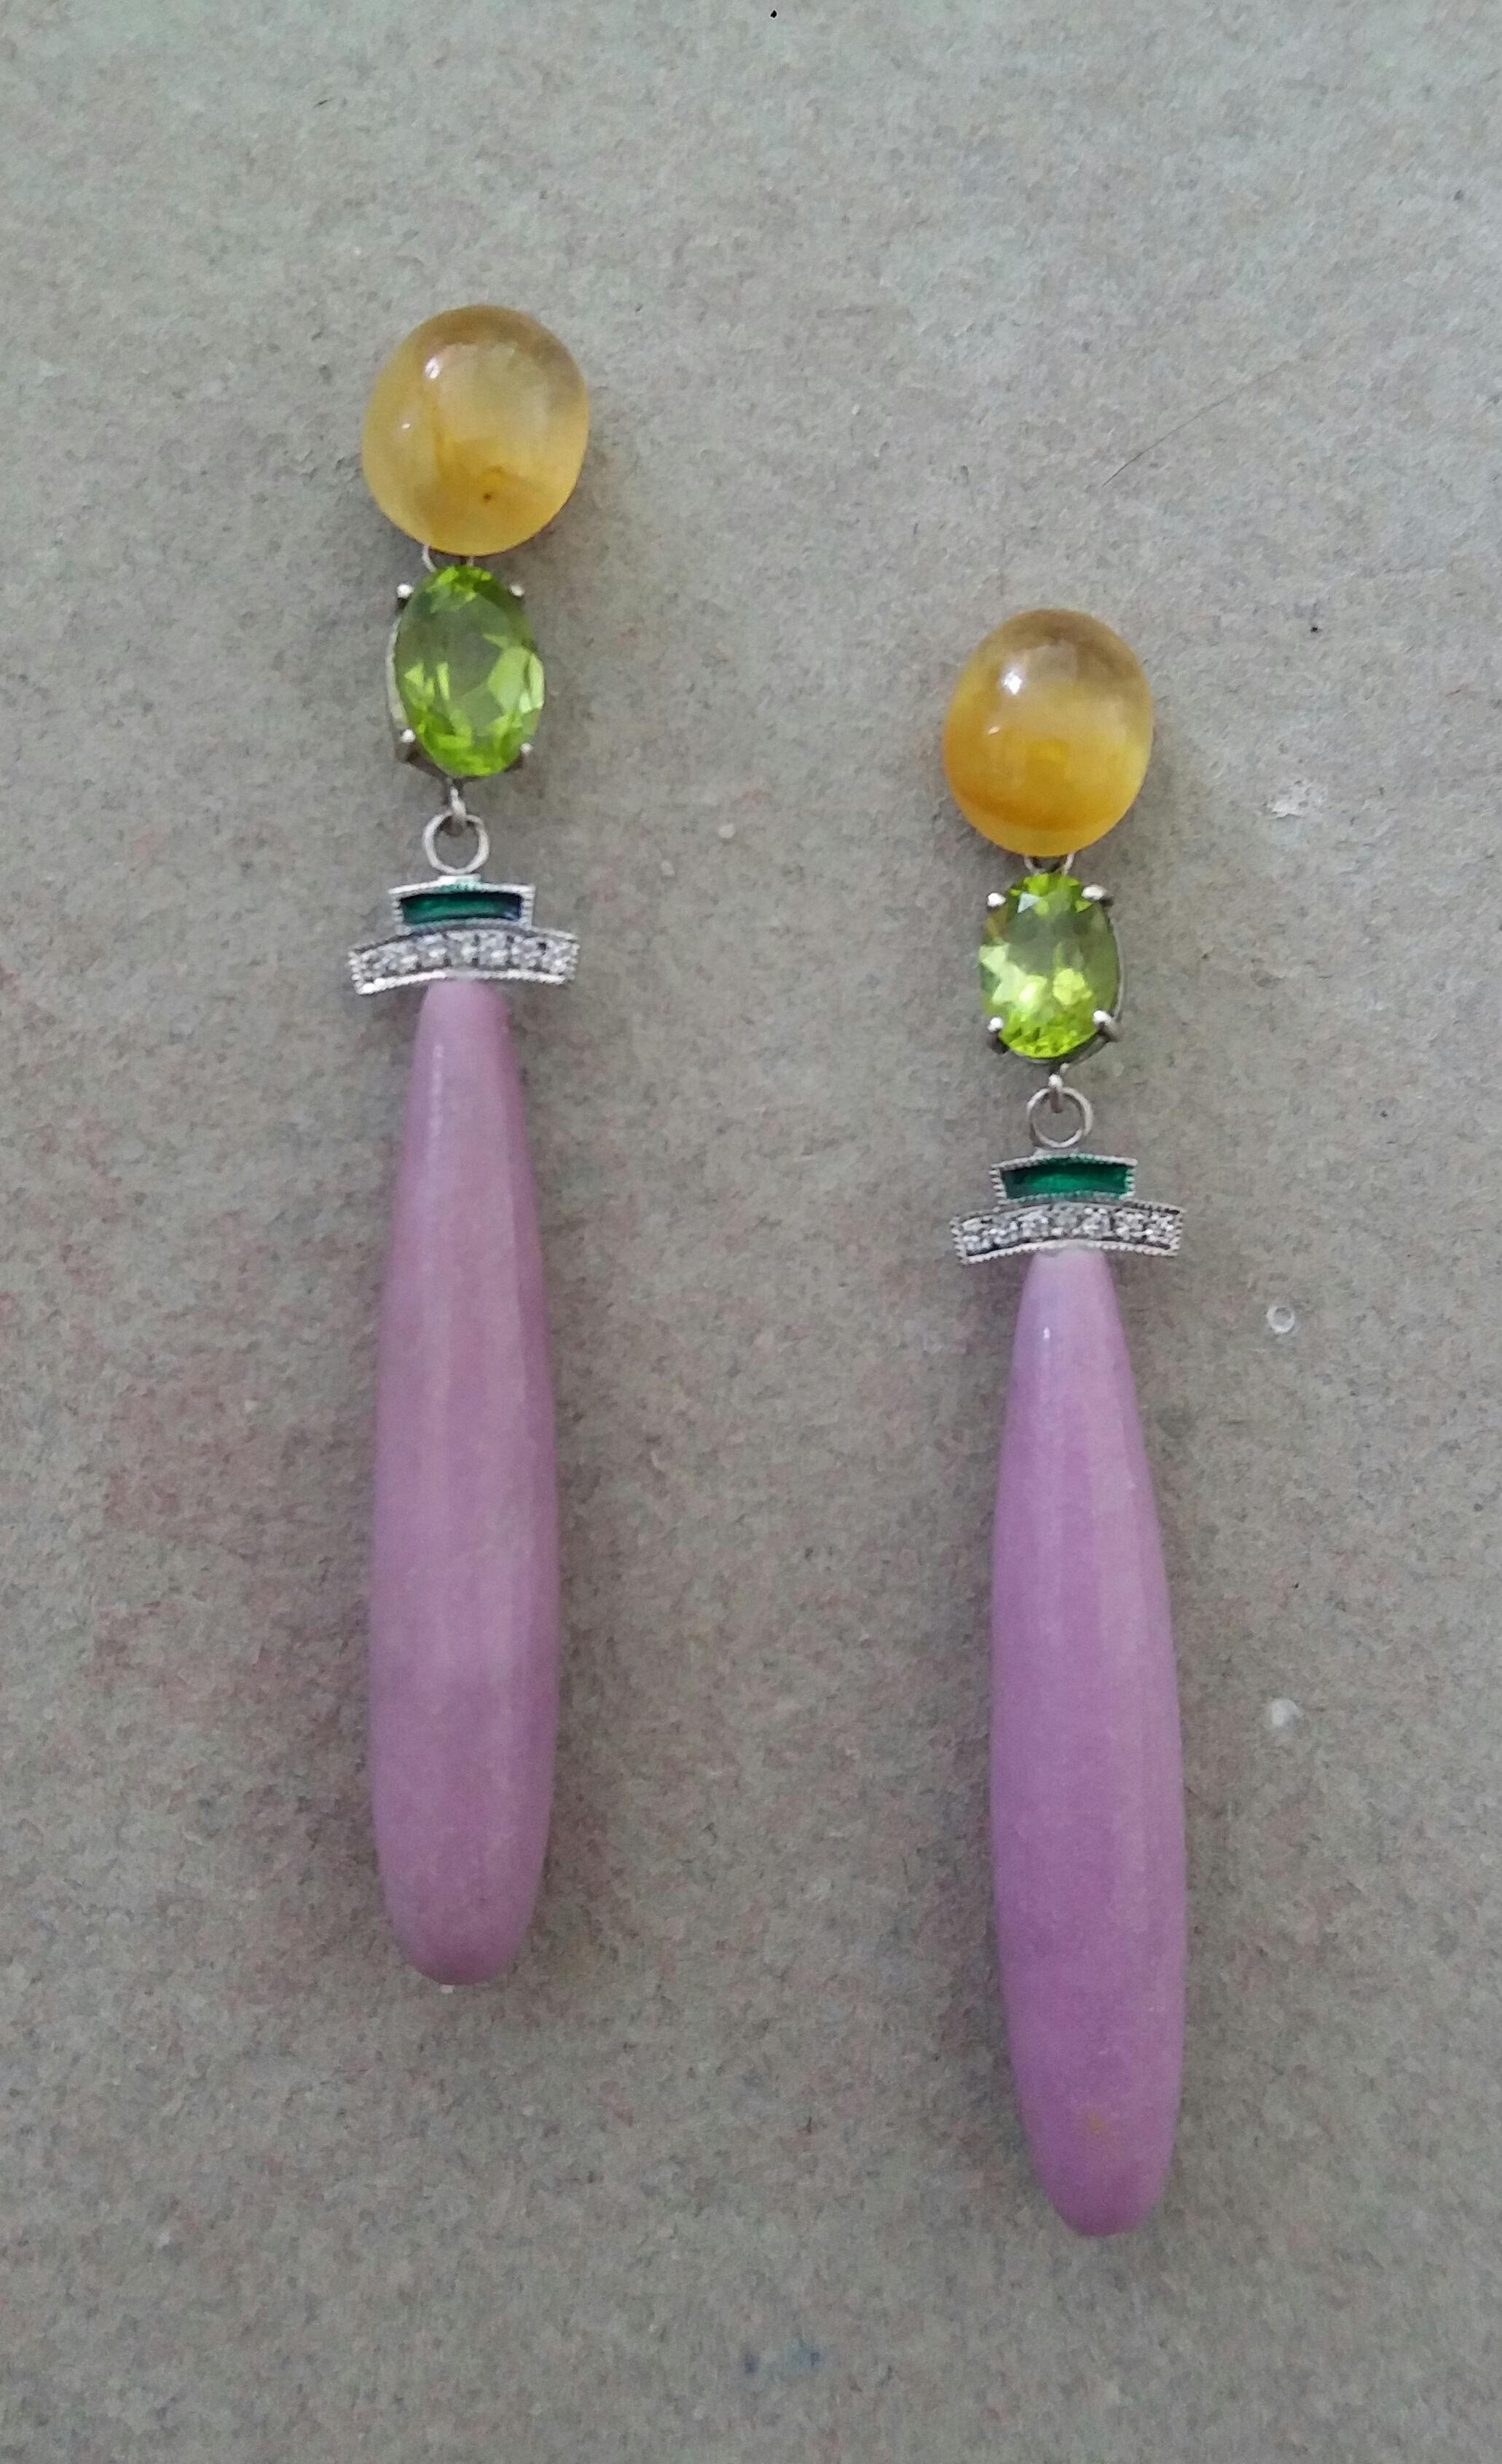 A pair of Art Deco style earrings, the upper part with 2 oval Yellow Sapphires cabochons 8 mm x 10 mm that support 2 oval faceted Peridot 6mmx8mm and 2 elements in white gold, diamonds and green enamel, while the lower parts are composed of 2